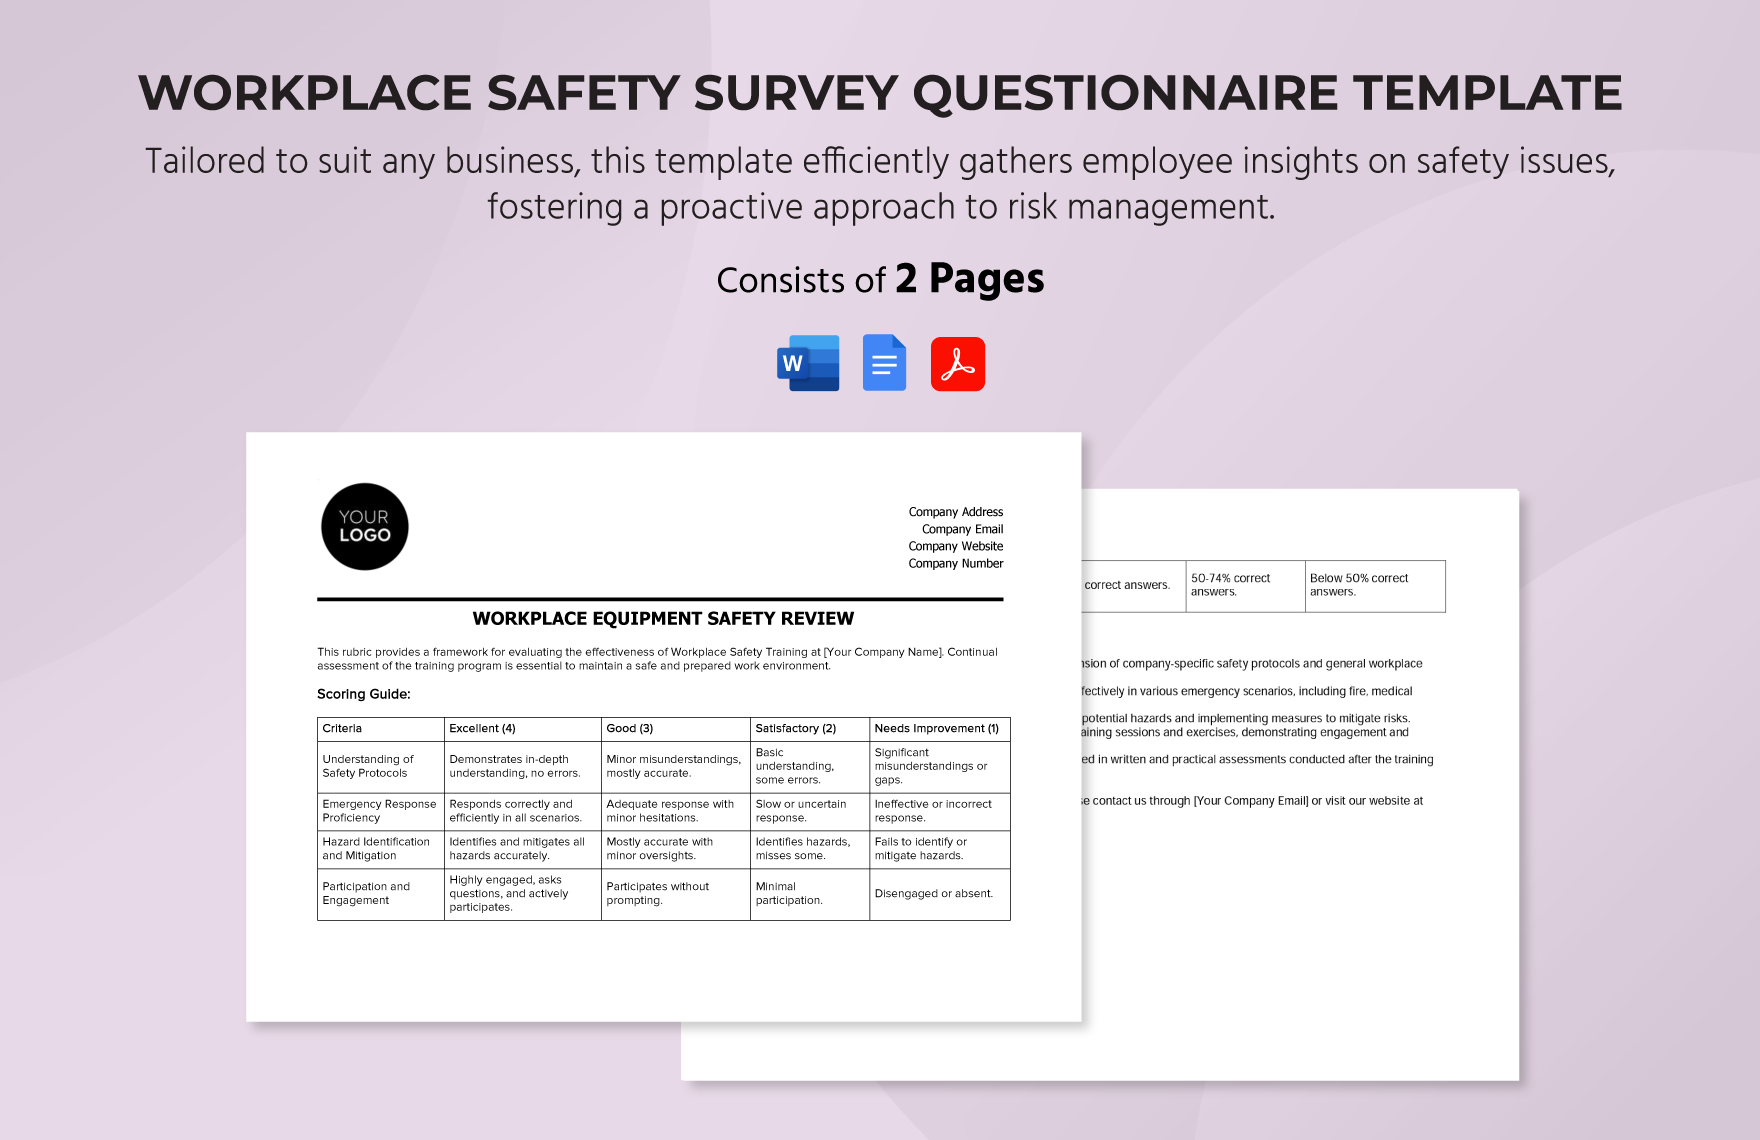 Workplace Safety Training Rubric Template in Word, Google Docs, PDF